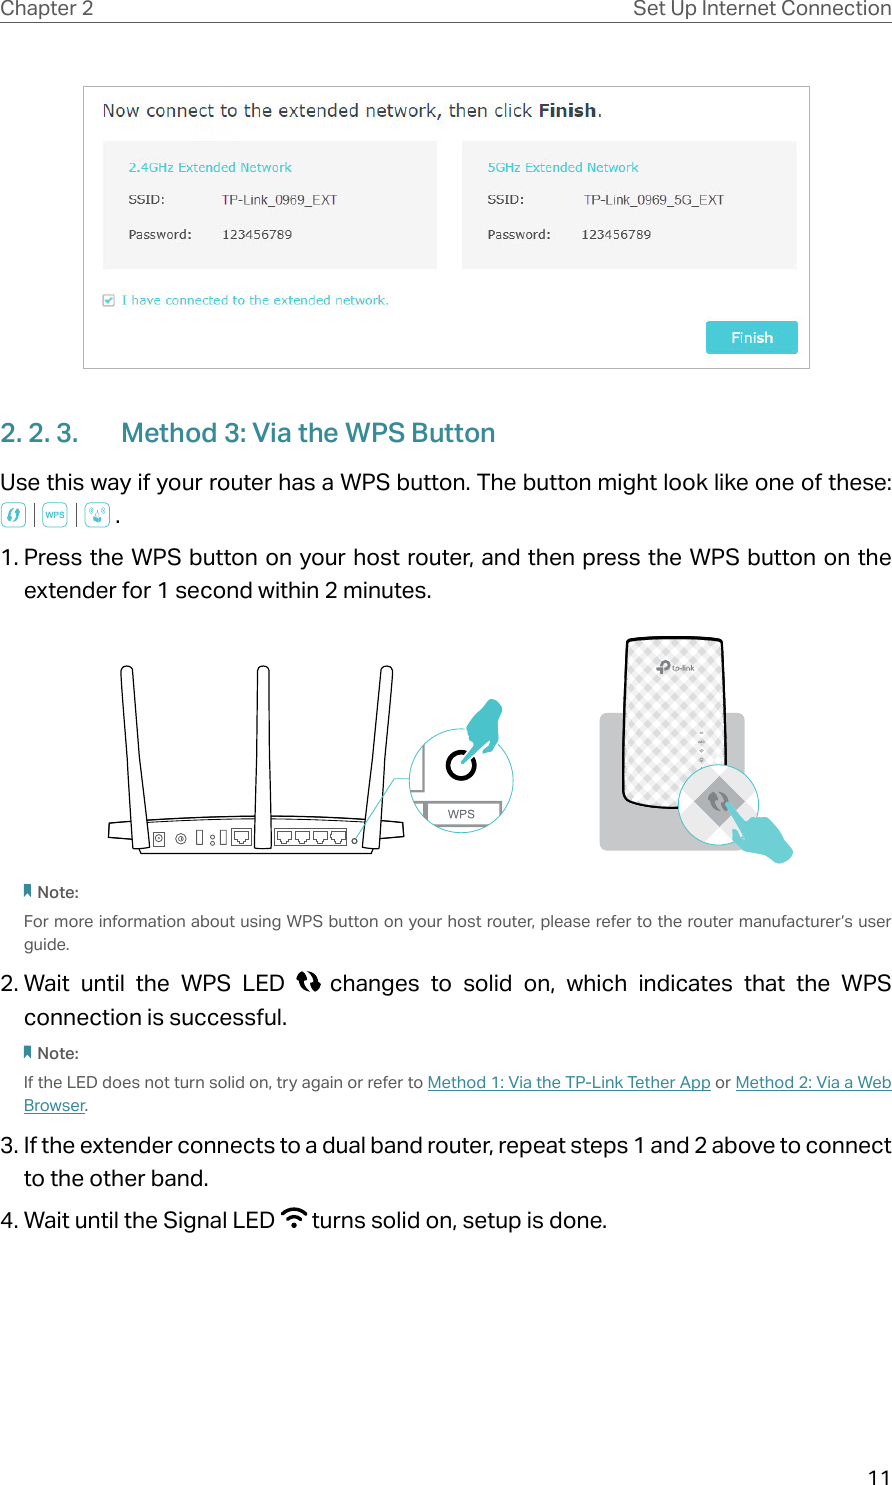 11Chapter 2 Set Up Internet Connection2. 2. 3.  Method 3: Via the WPS ButtonUse this way if your router has a WPS button. The button might look like one of these:  . 1. Press the WPS button on your host router, and then press the WPS button on the extender for 1 second within 2 minutes.Note:For more information about using WPS button on your host router, please refer to the router manufacturer’s user guide.2. Wait until the WPS LED   changes to solid on, which indicates that the WPS connection is successful.   Note:If the LED does not turn solid on, try again or refer to Method 1: Via the TP-Link Tether App or Method 2: Via a Web Browser.3. If the extender connects to a dual band router, repeat steps 1 and 2 above to connect to the other band.4. Wait until the Signal LED   turns solid on, setup is done.